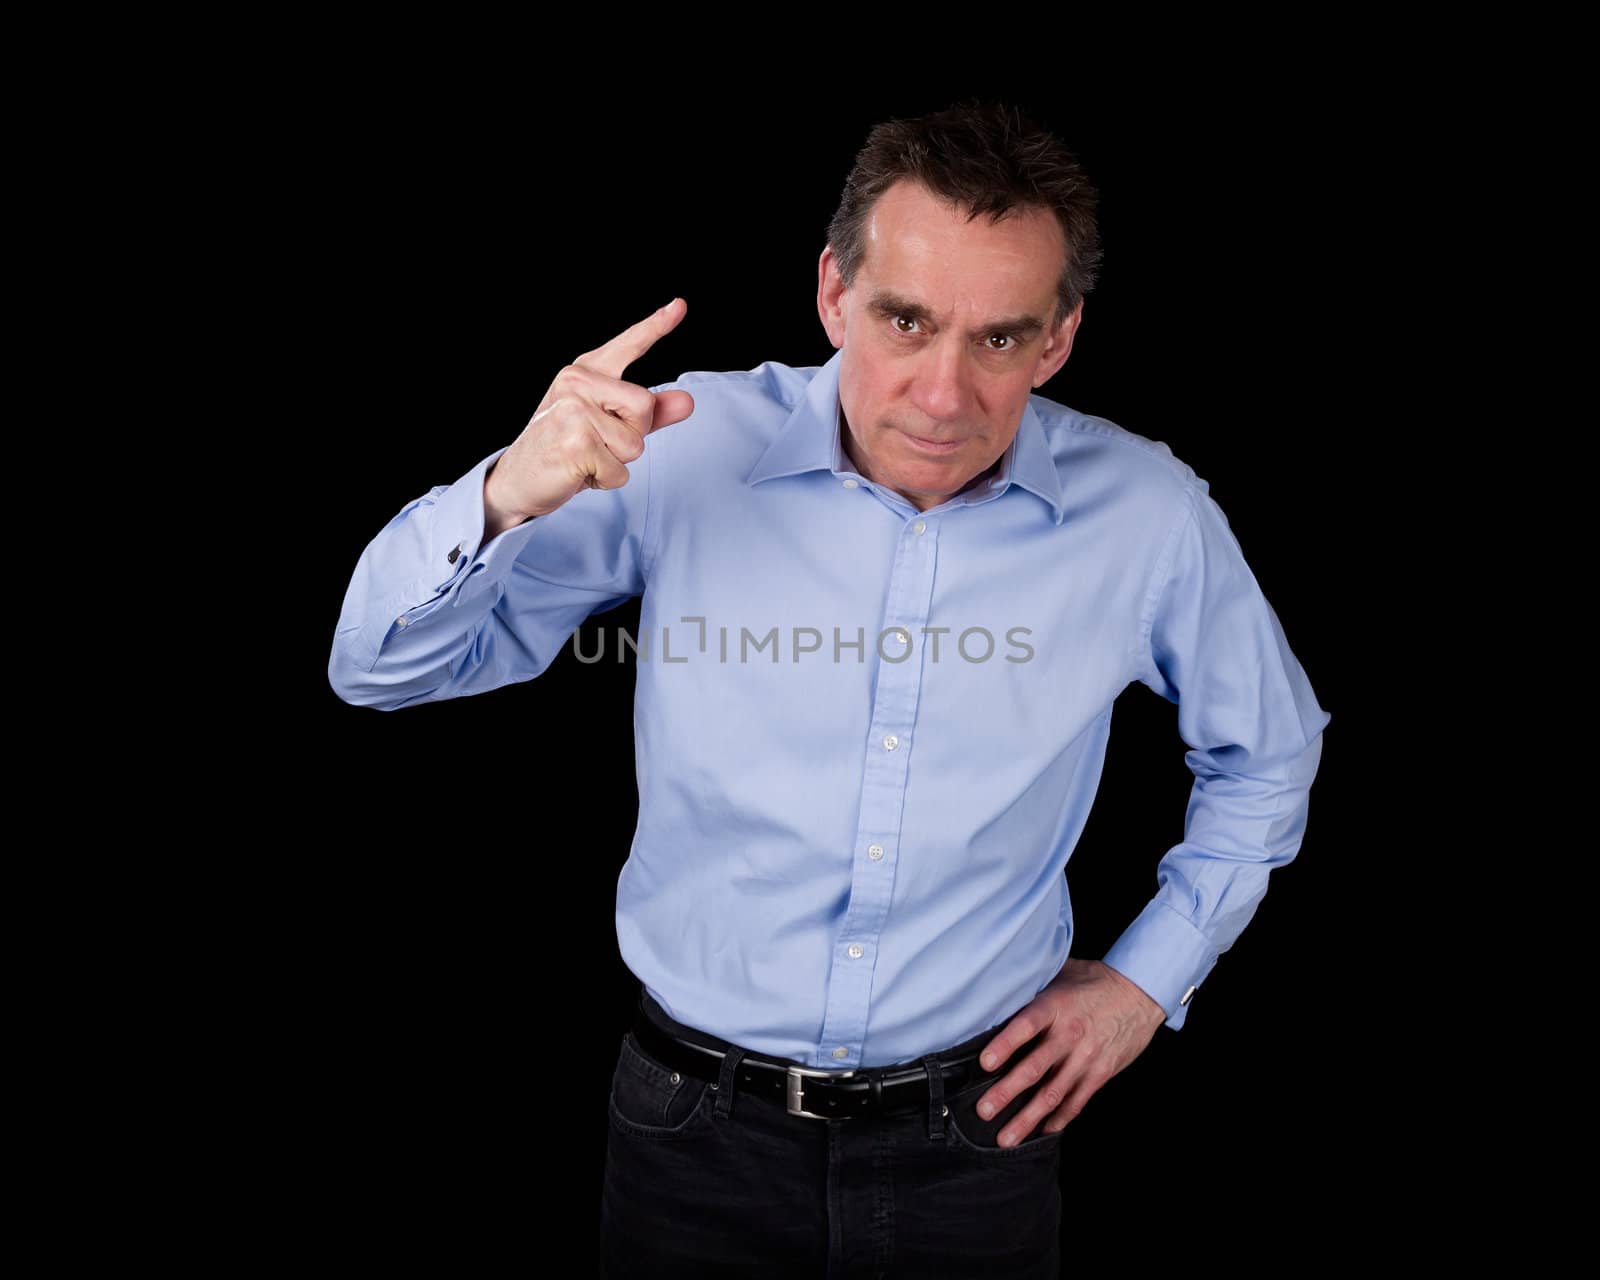 Angry Middle Age Business Man Shaking Finger Black Background